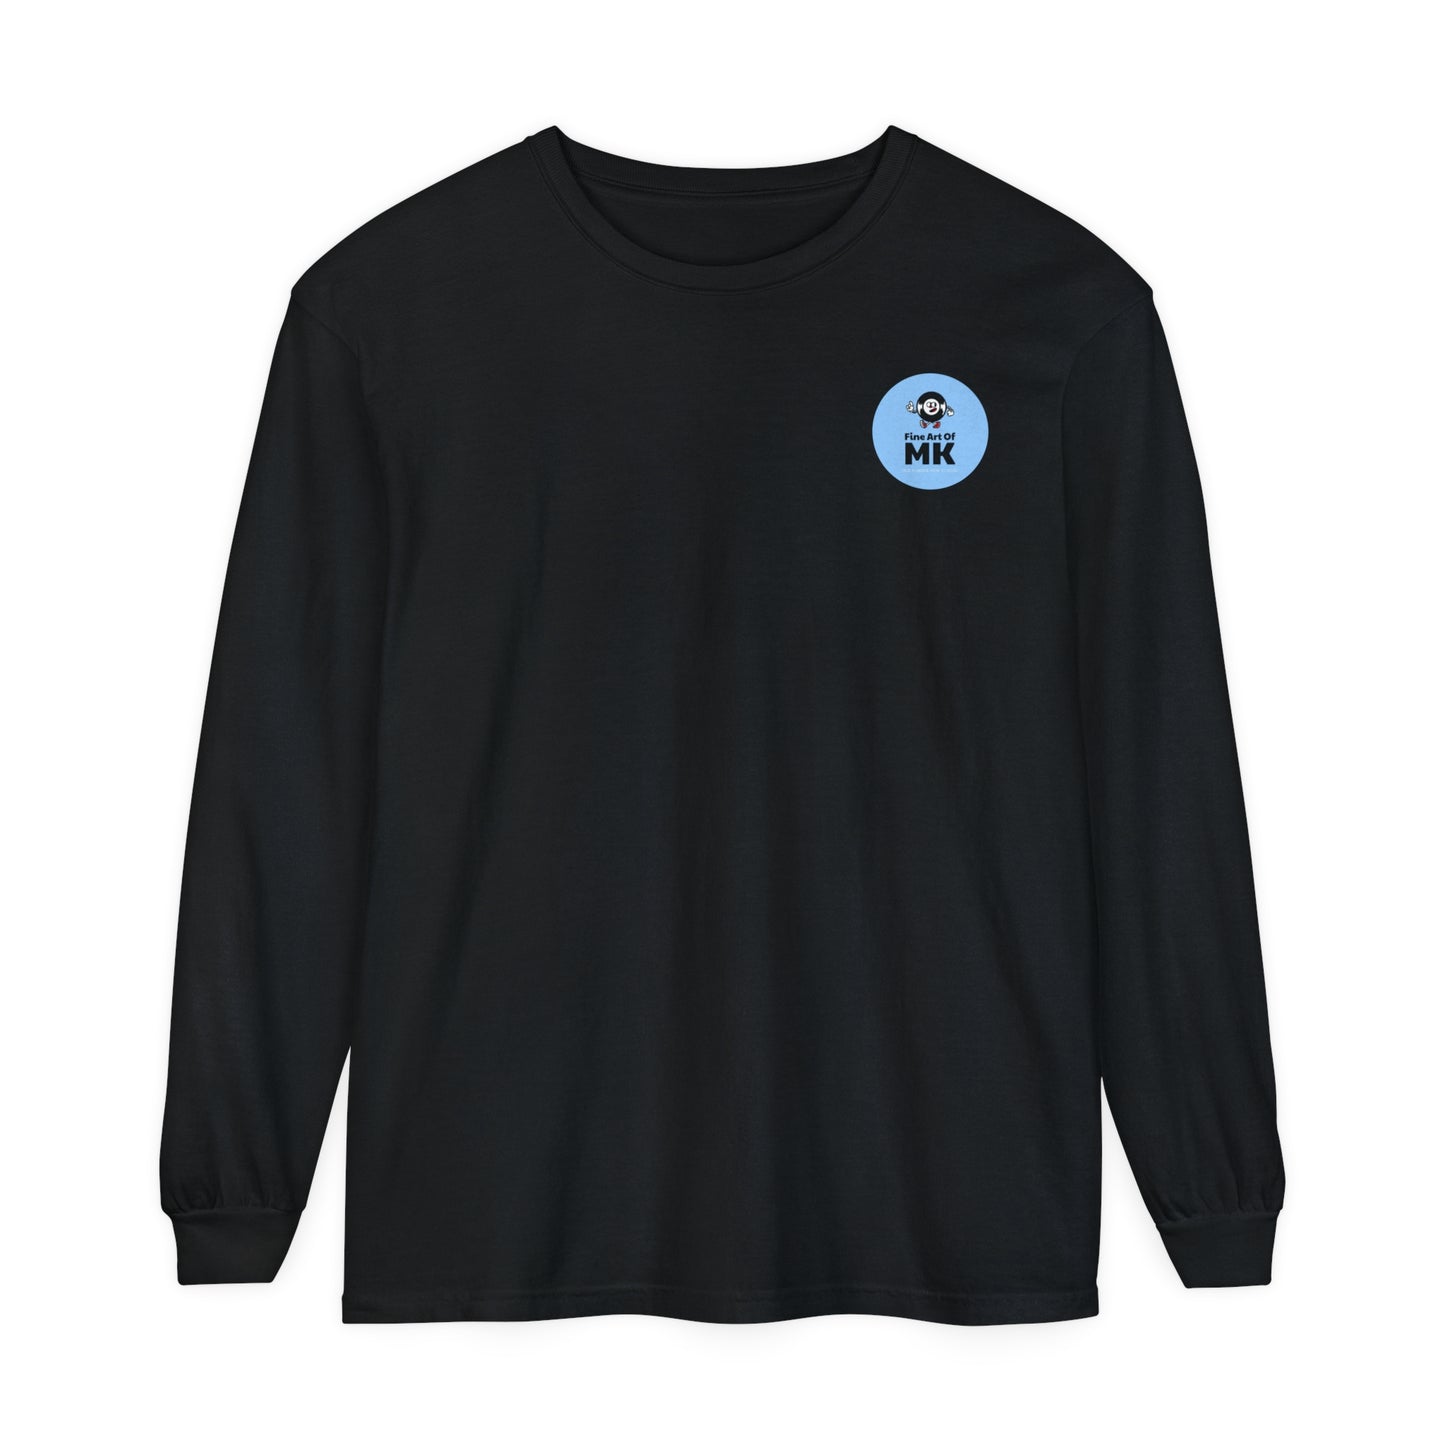 Post Malone - White Iverson -  Unisex Comfort Colors Long Sleeve T-Shirt